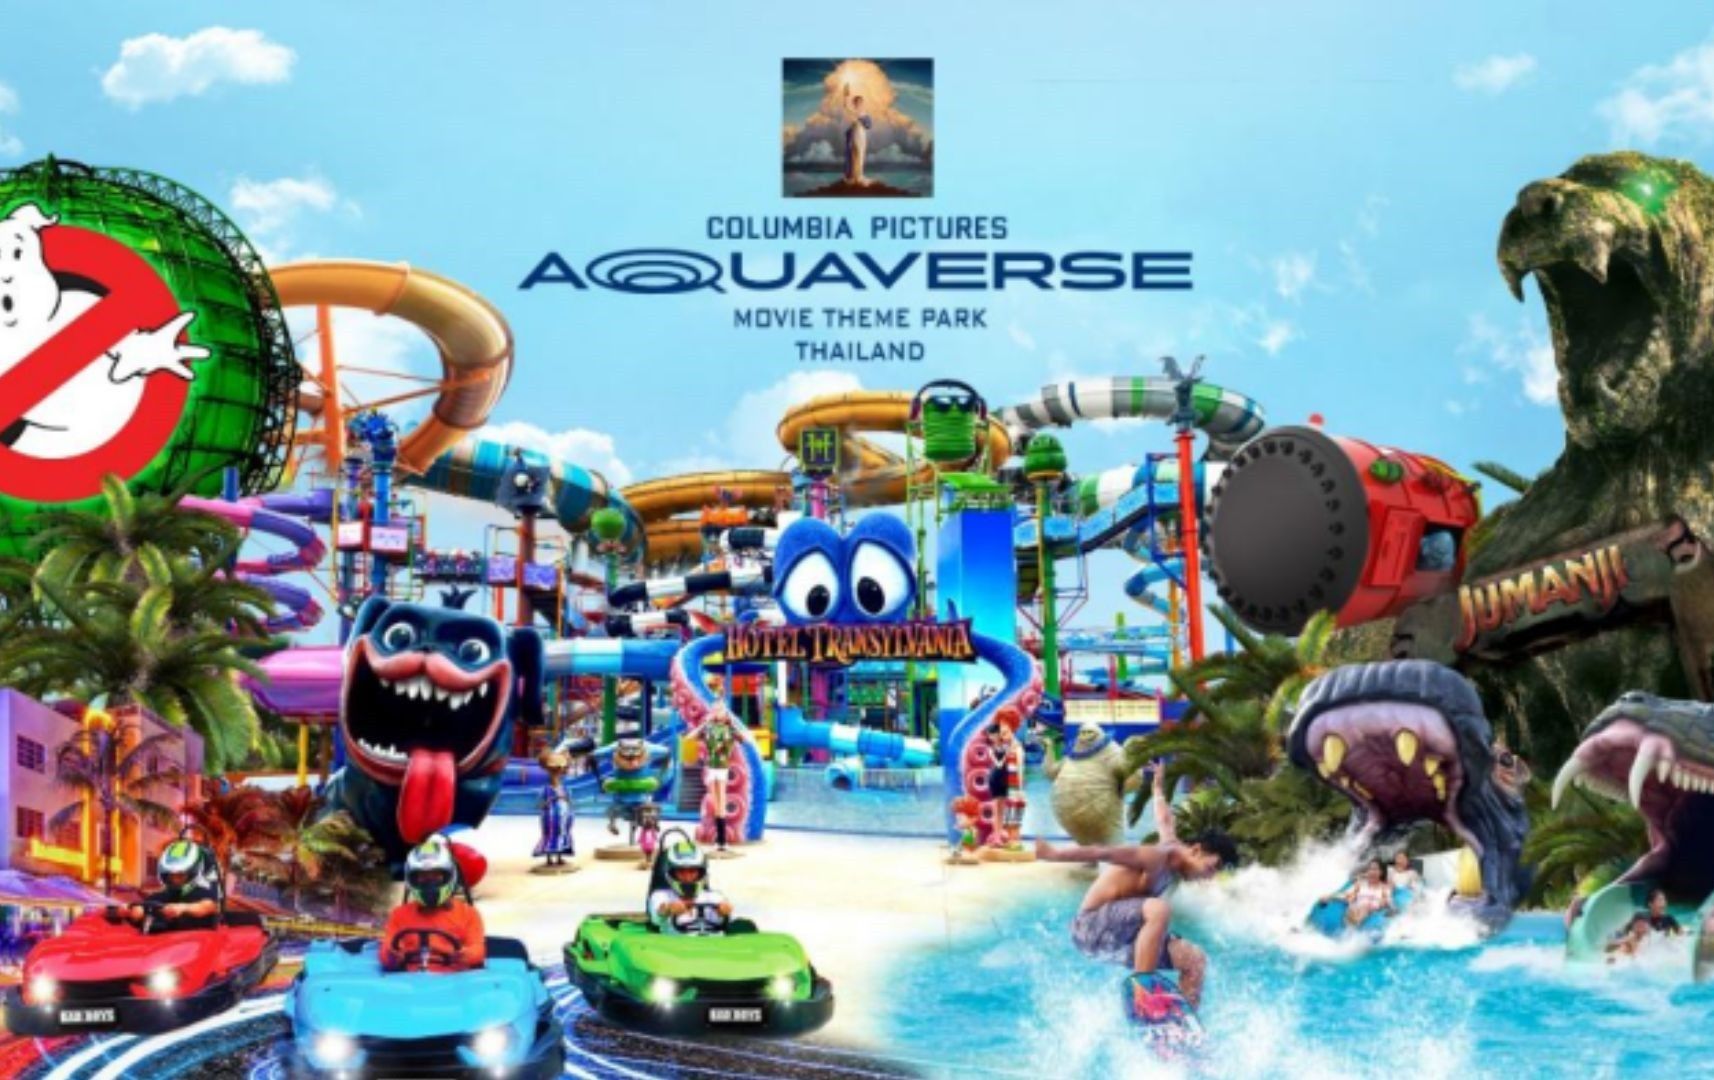 'Aquaverse' movie theme park opening in Thailand this October